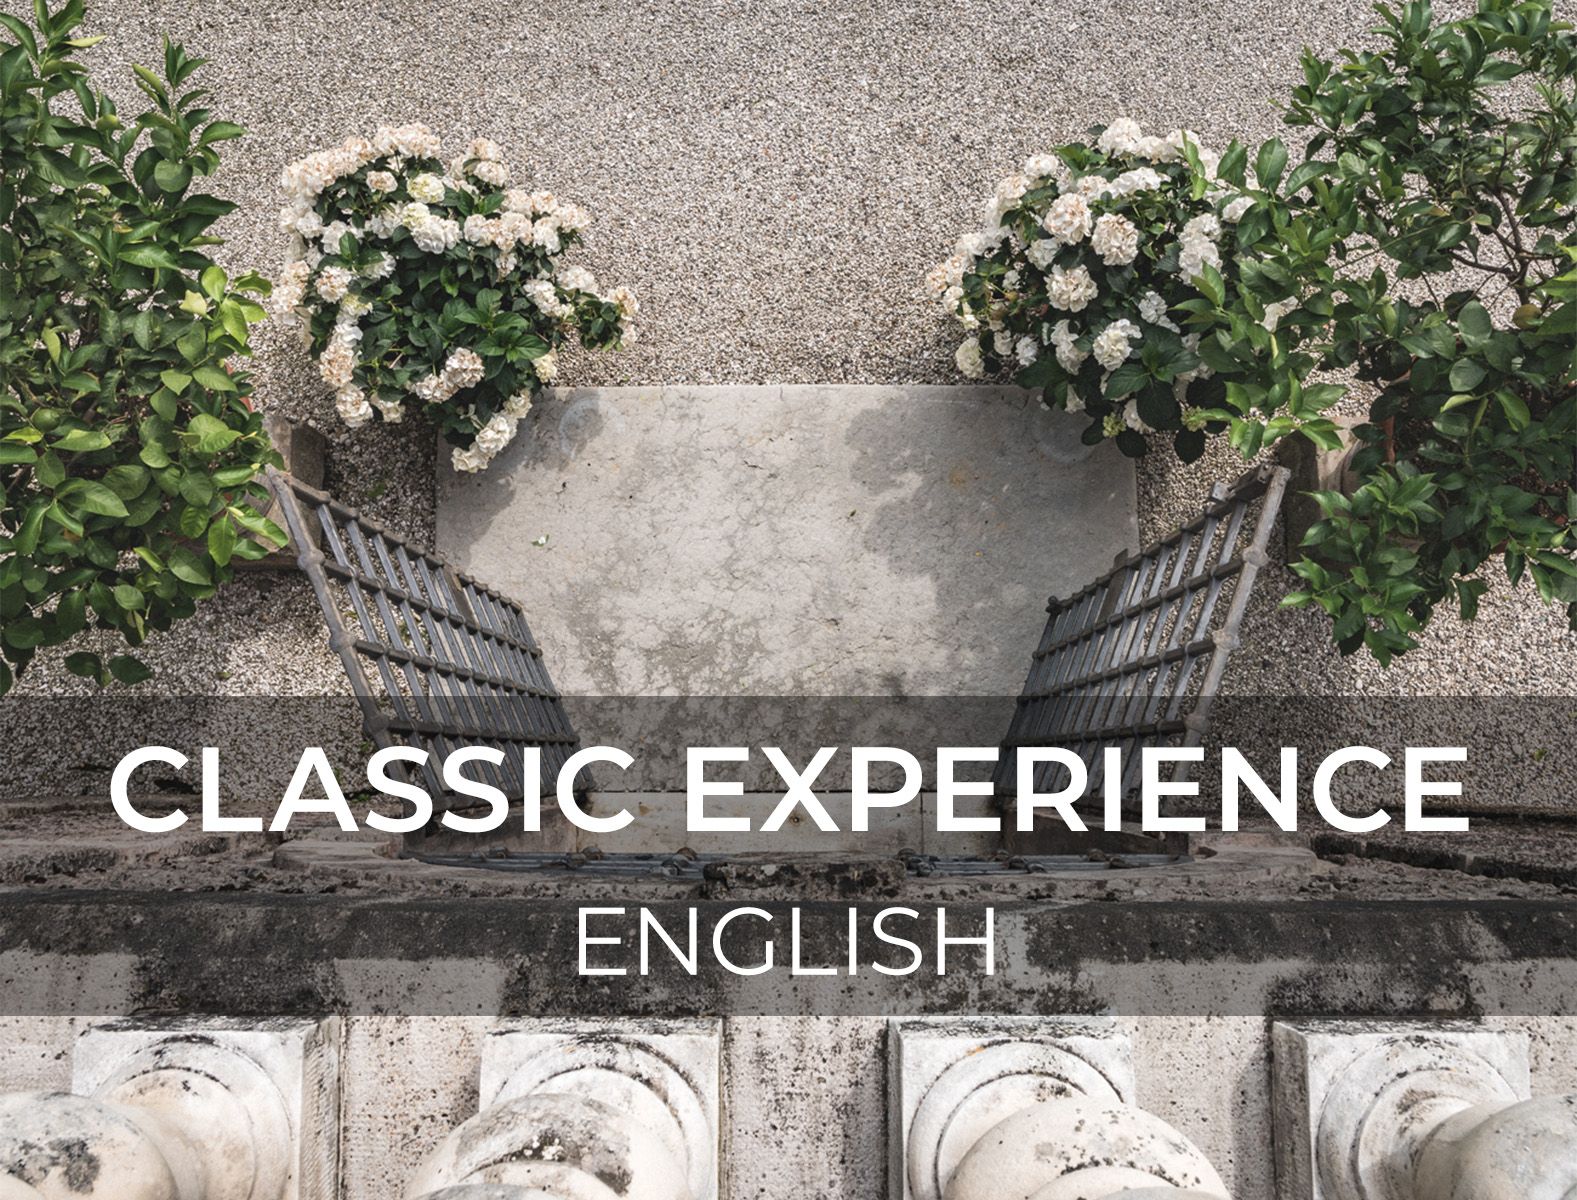 CLASSIC EXPERIENCE - ENGLISH